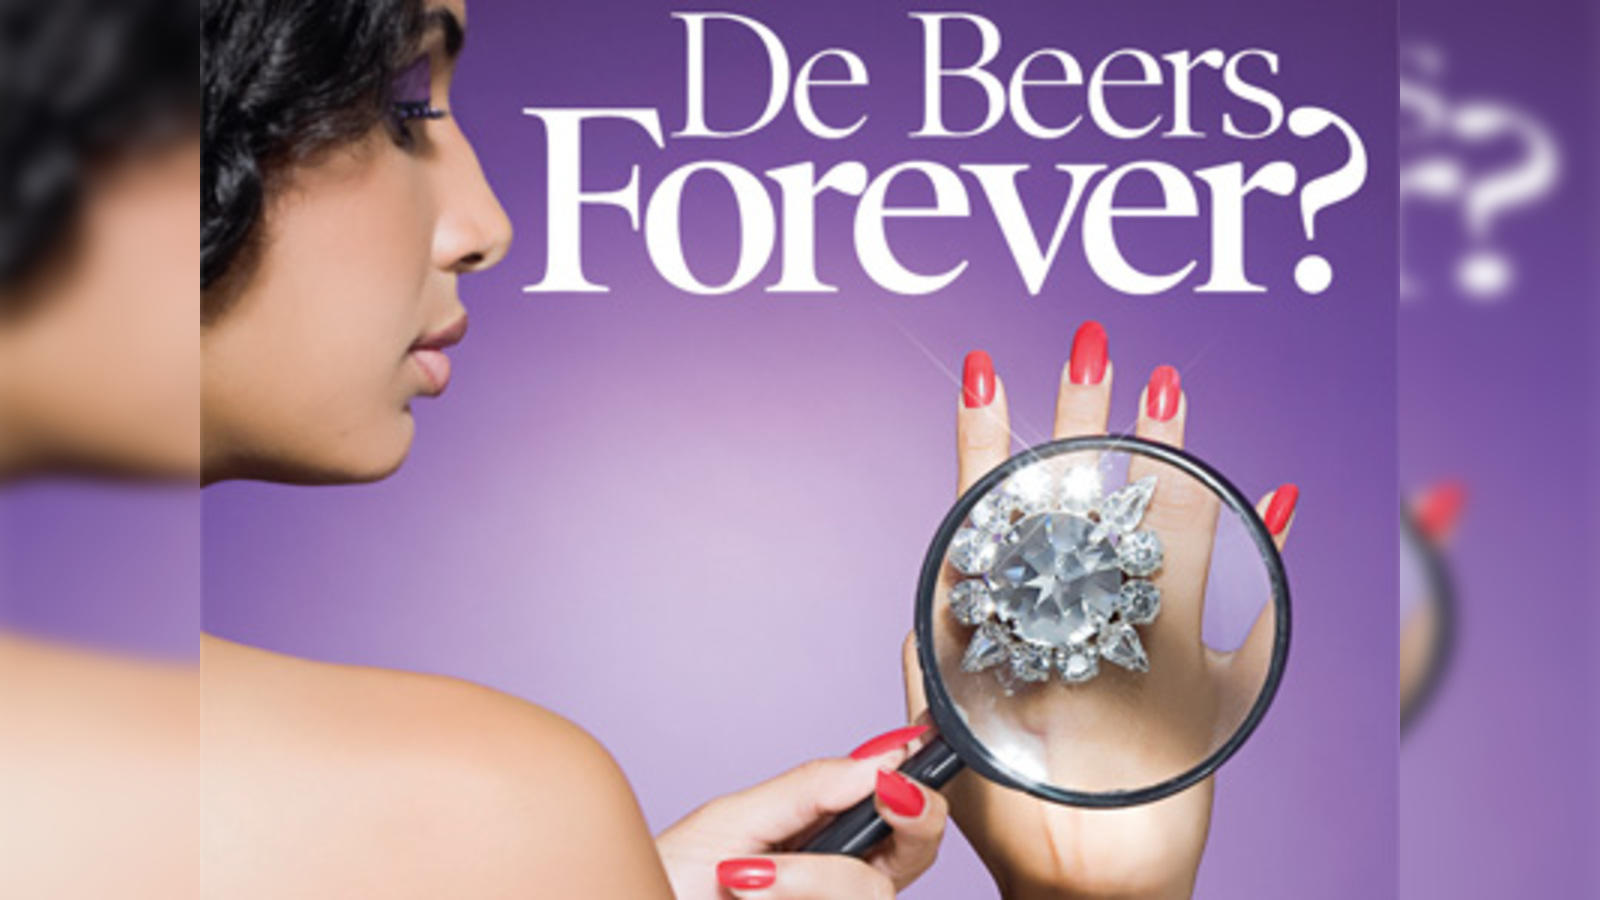 Solved DeBeers has a monopoly on the production of diamonds